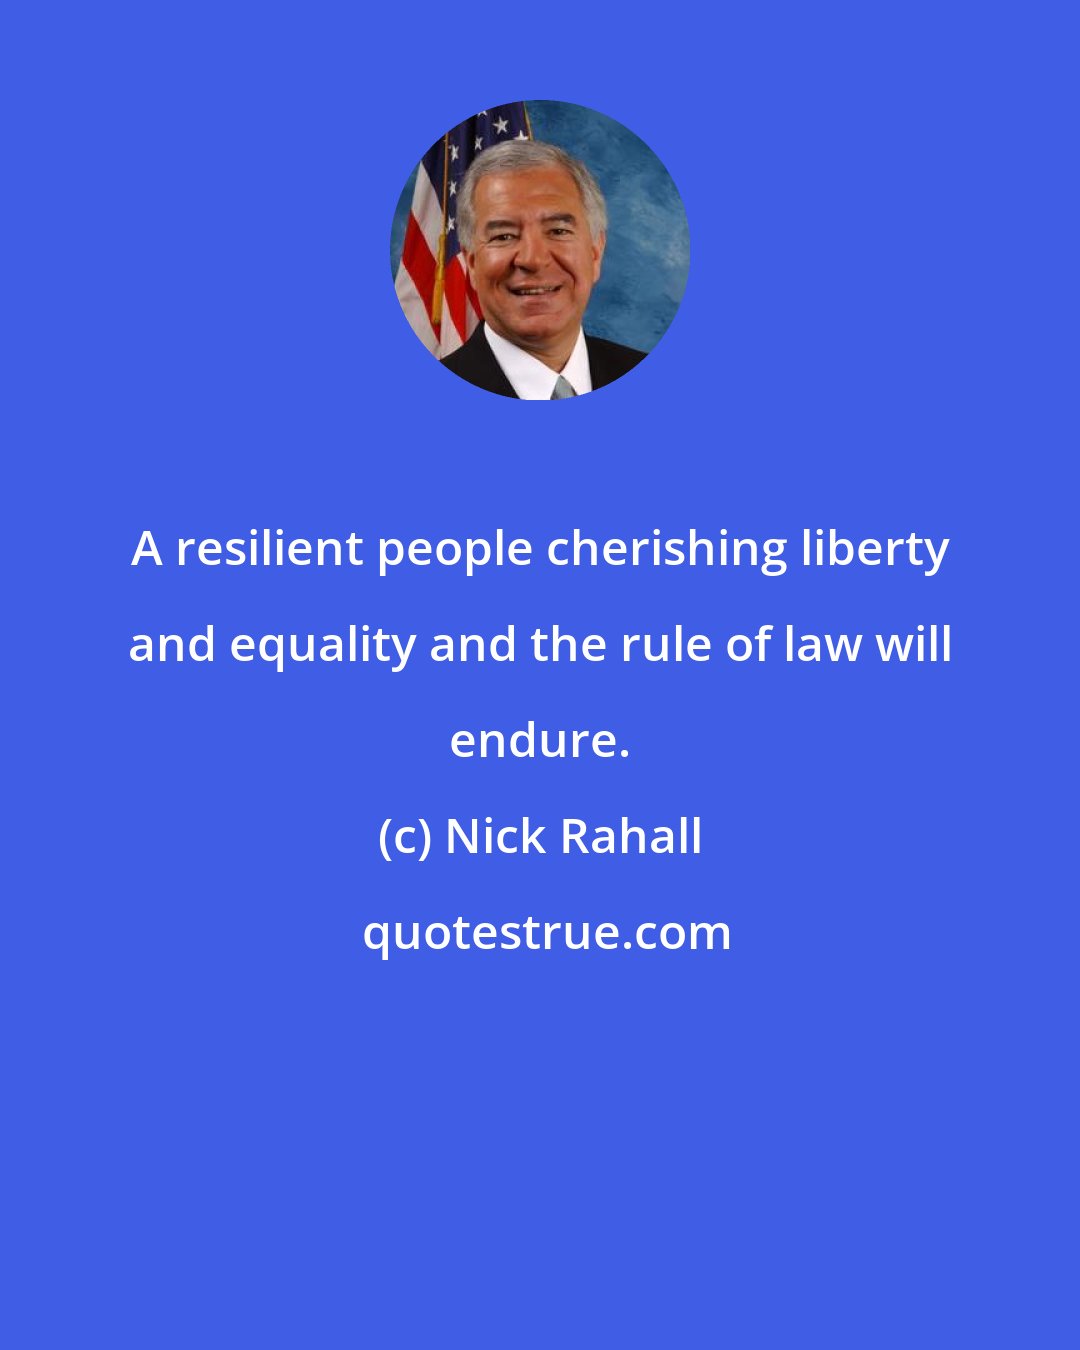 Nick Rahall: A resilient people cherishing liberty and equality and the rule of law will endure.